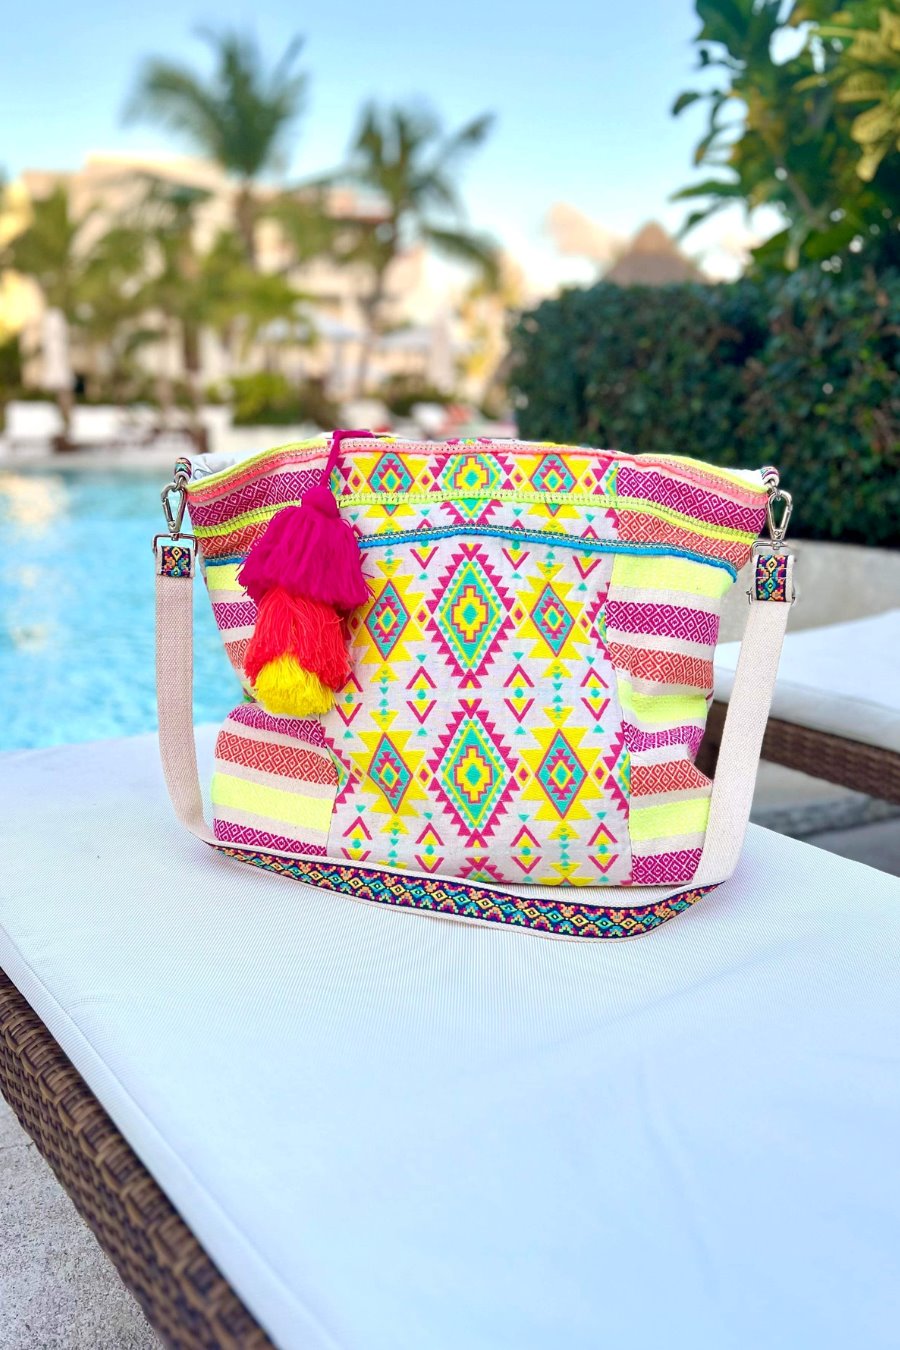 Turks and Caicos Tote Bag